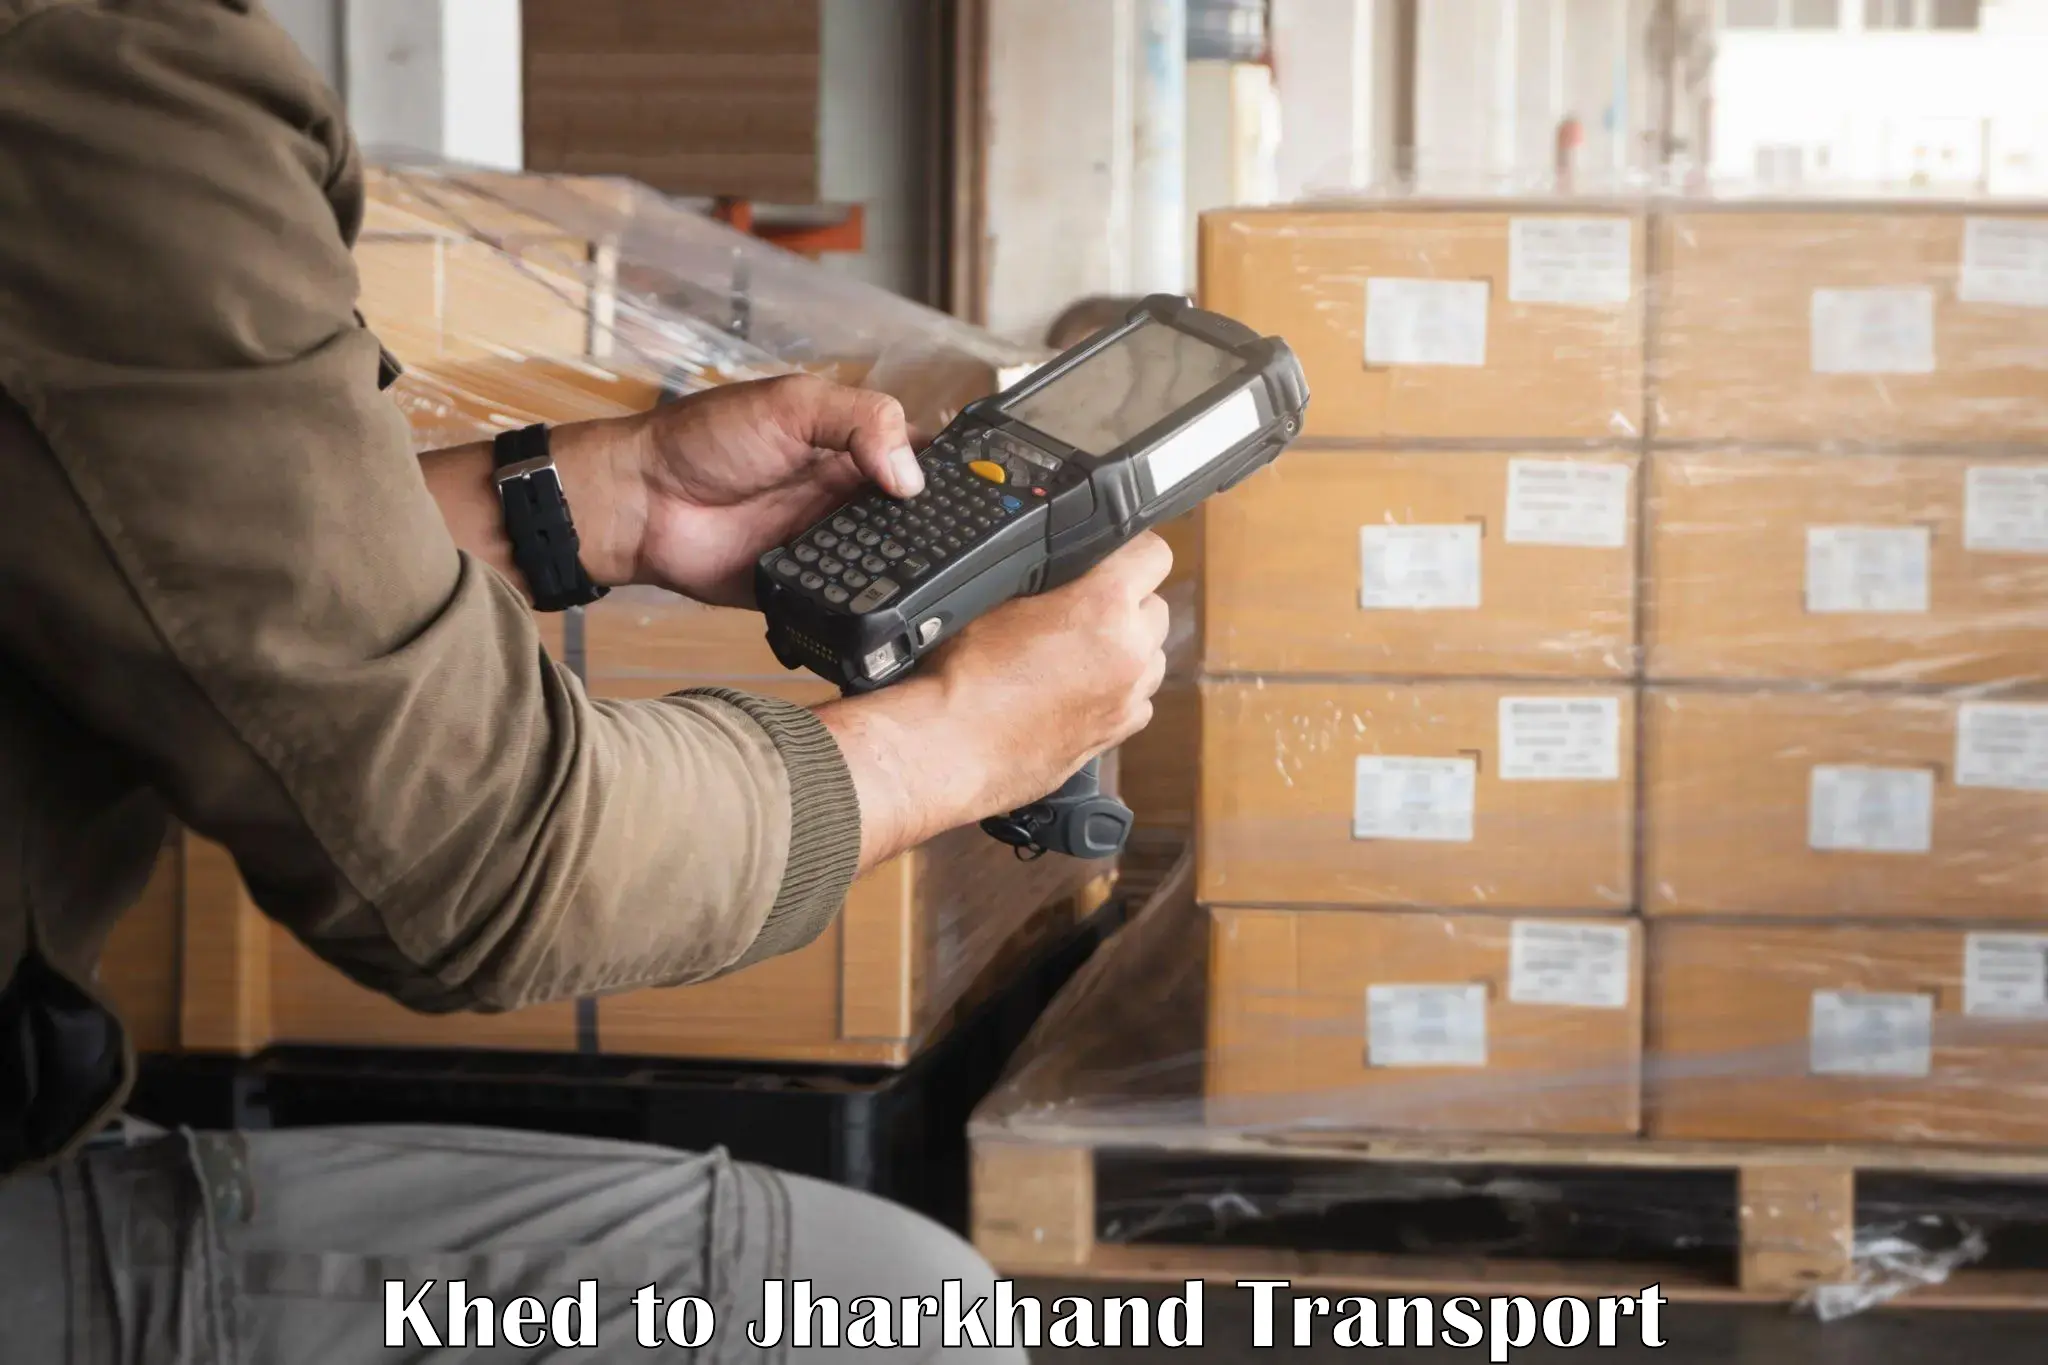 Online transport booking Khed to Dhanbad